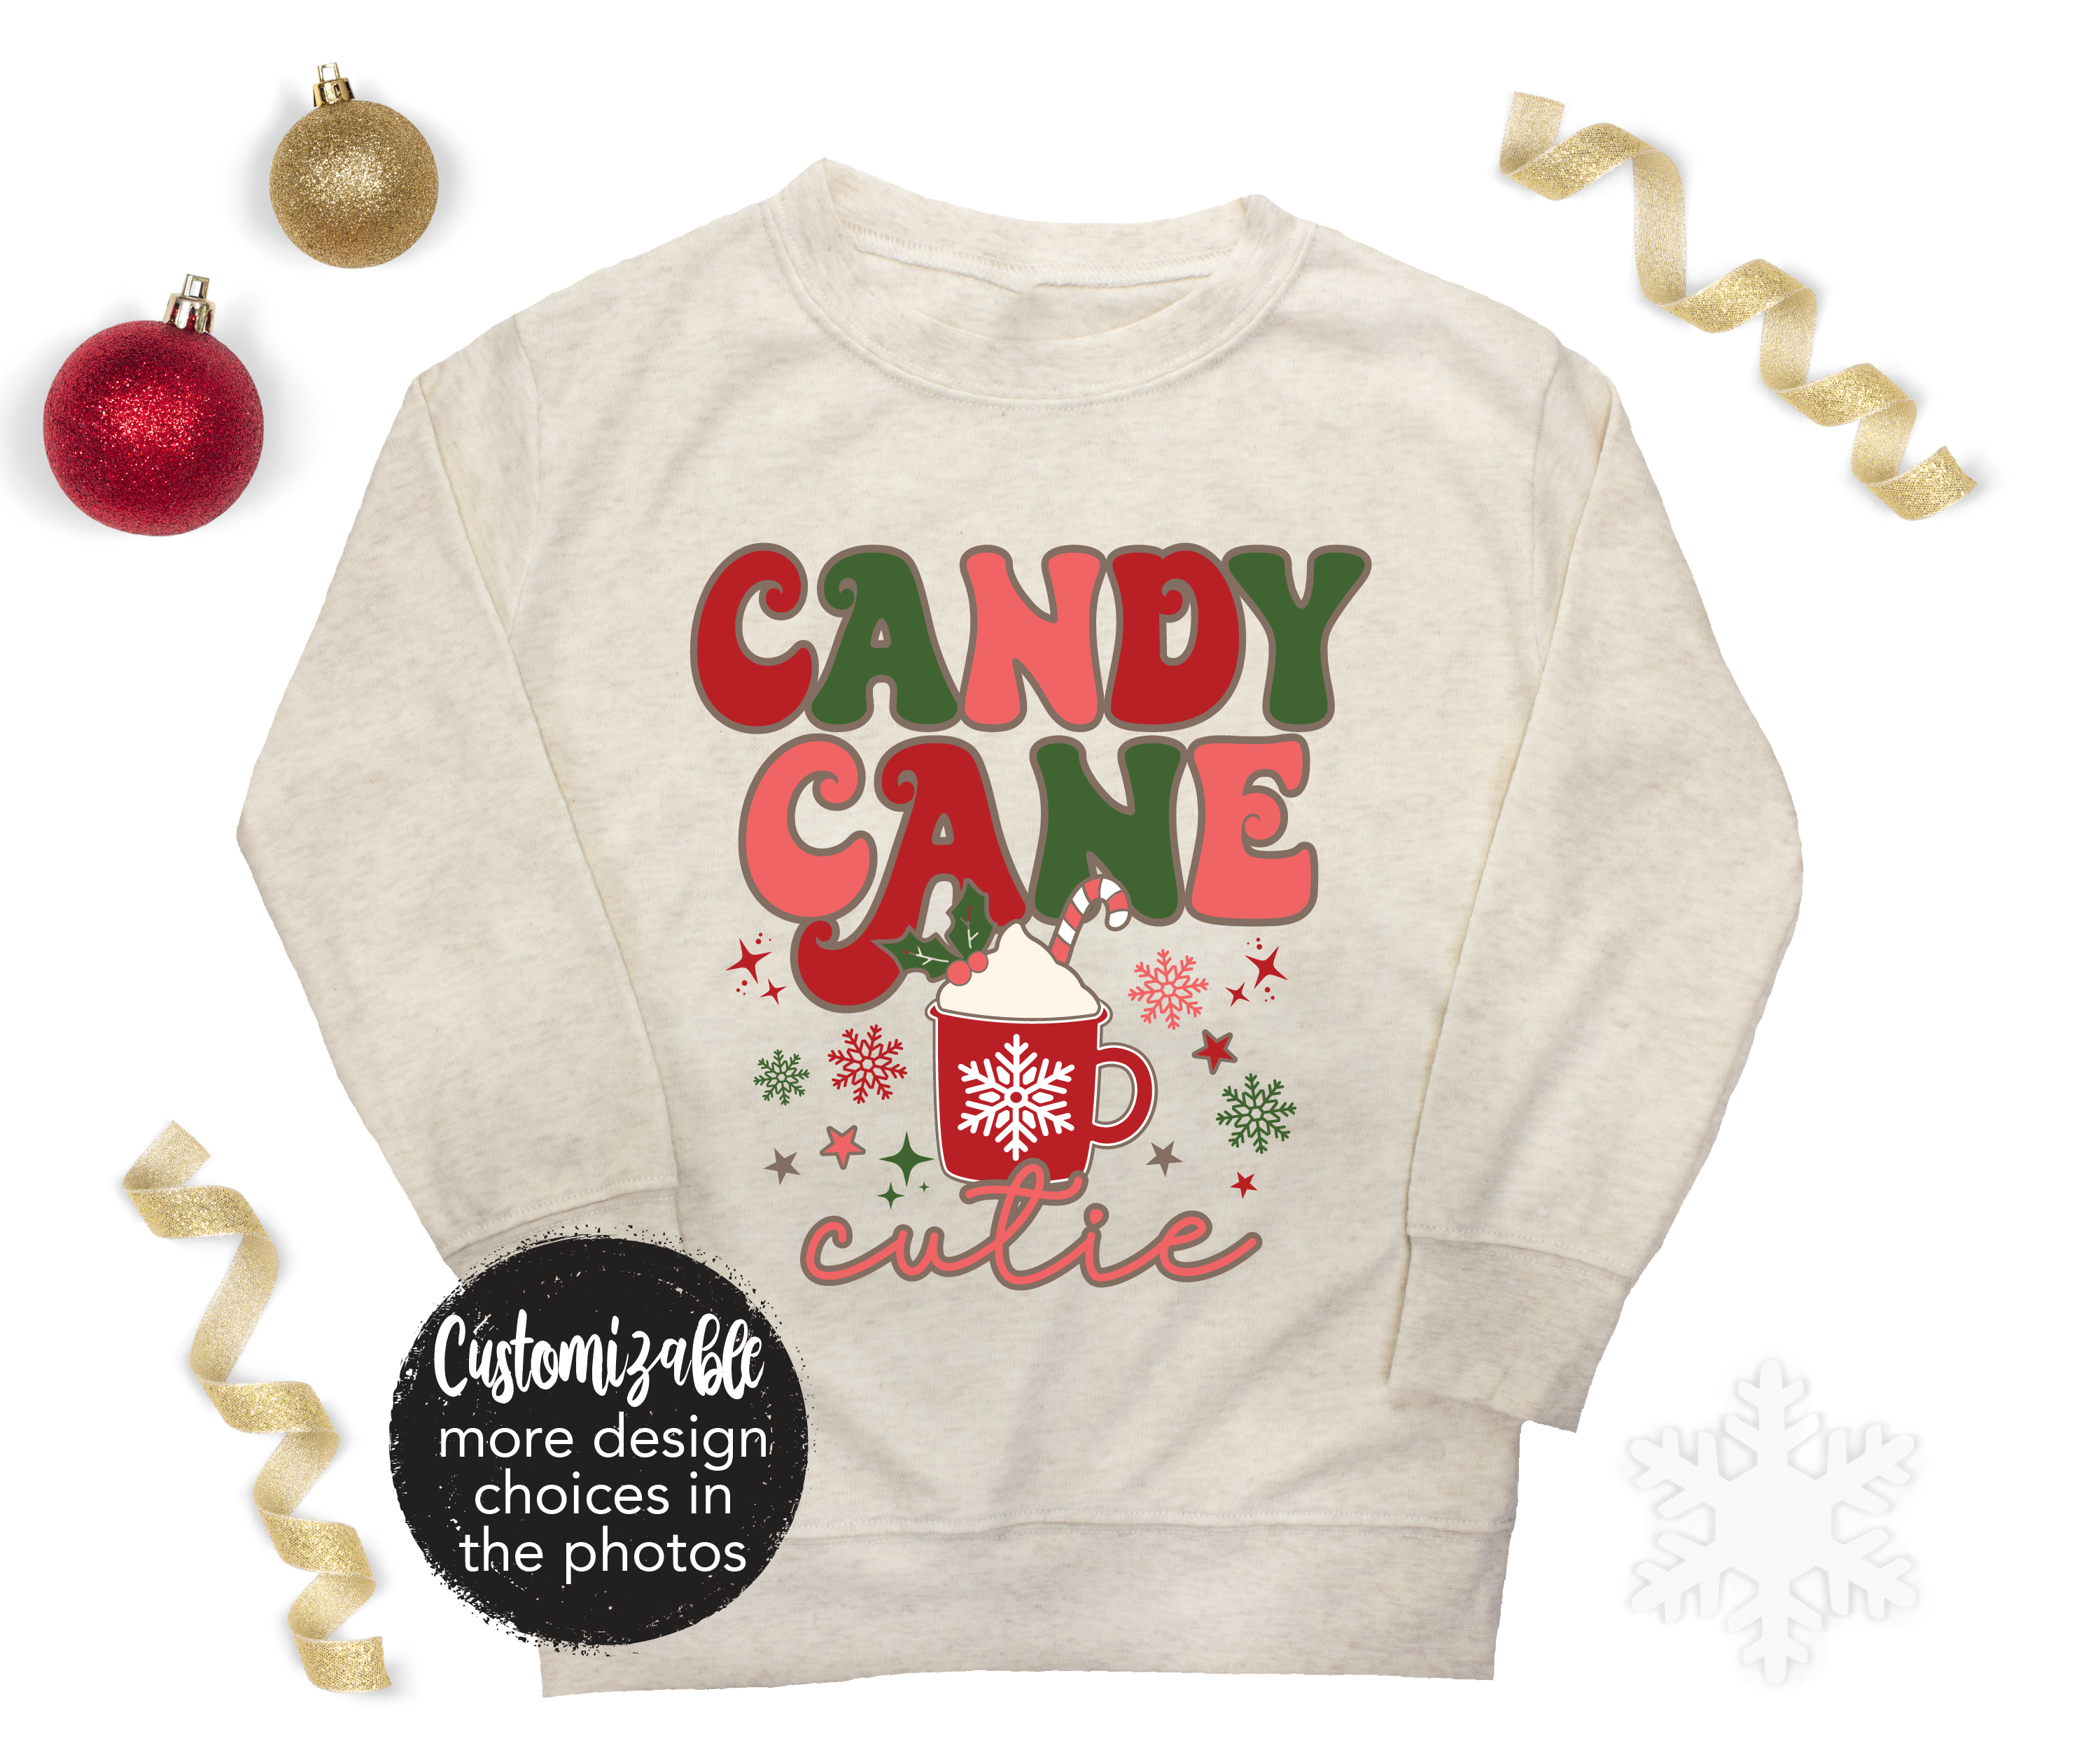 Candy Cane Cutie Shirt Matching Printed Shirt Infant Toddler Youth